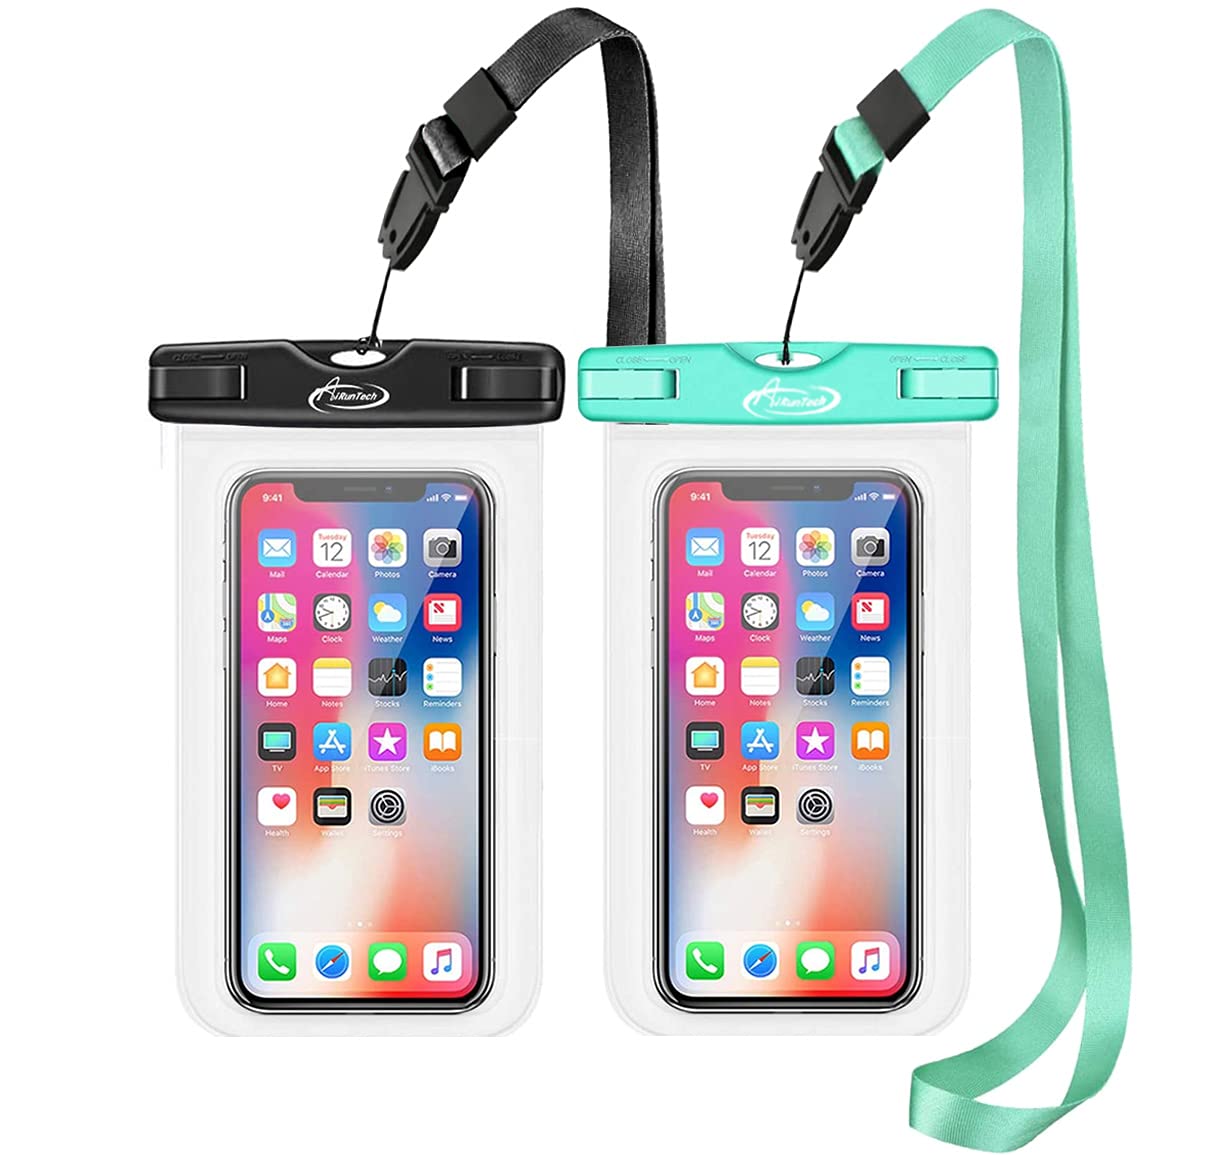 AiRunTech Waterproof Case, Waterproof Cell Phone Dry Bag Compatible for iPhone 14/13/12/12 Pro Max/11/11 Pro/SE/Xs Max/XR/8P/7 G